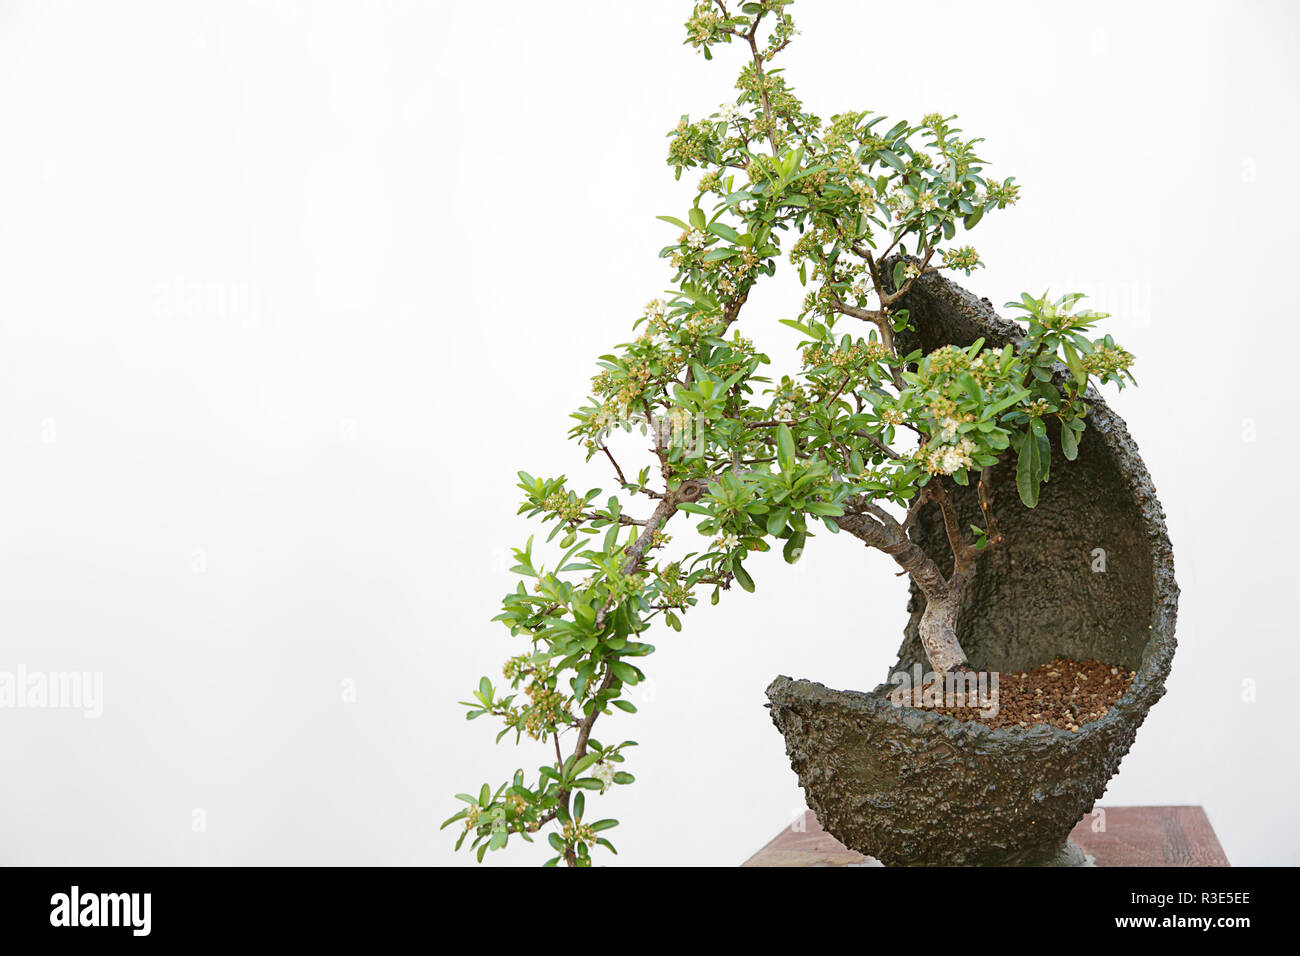 Pyracantha coccinea bonsai on a wooden table and white background Stock Photo